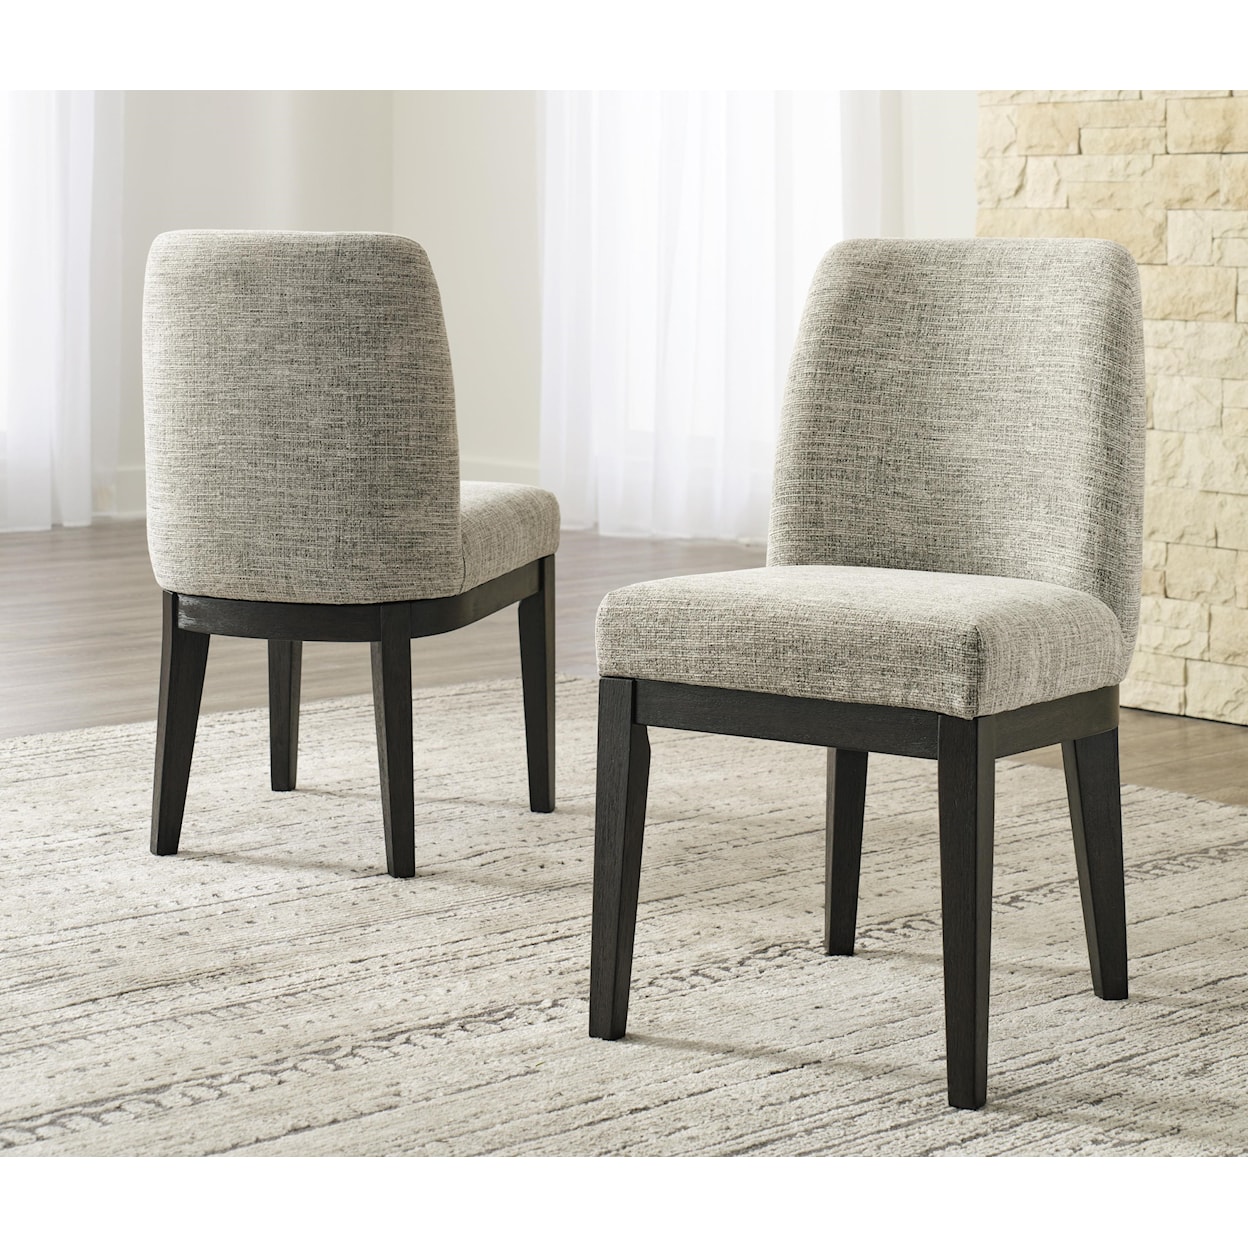 Signature Design by Ashley Burkaus DINING CHAIR